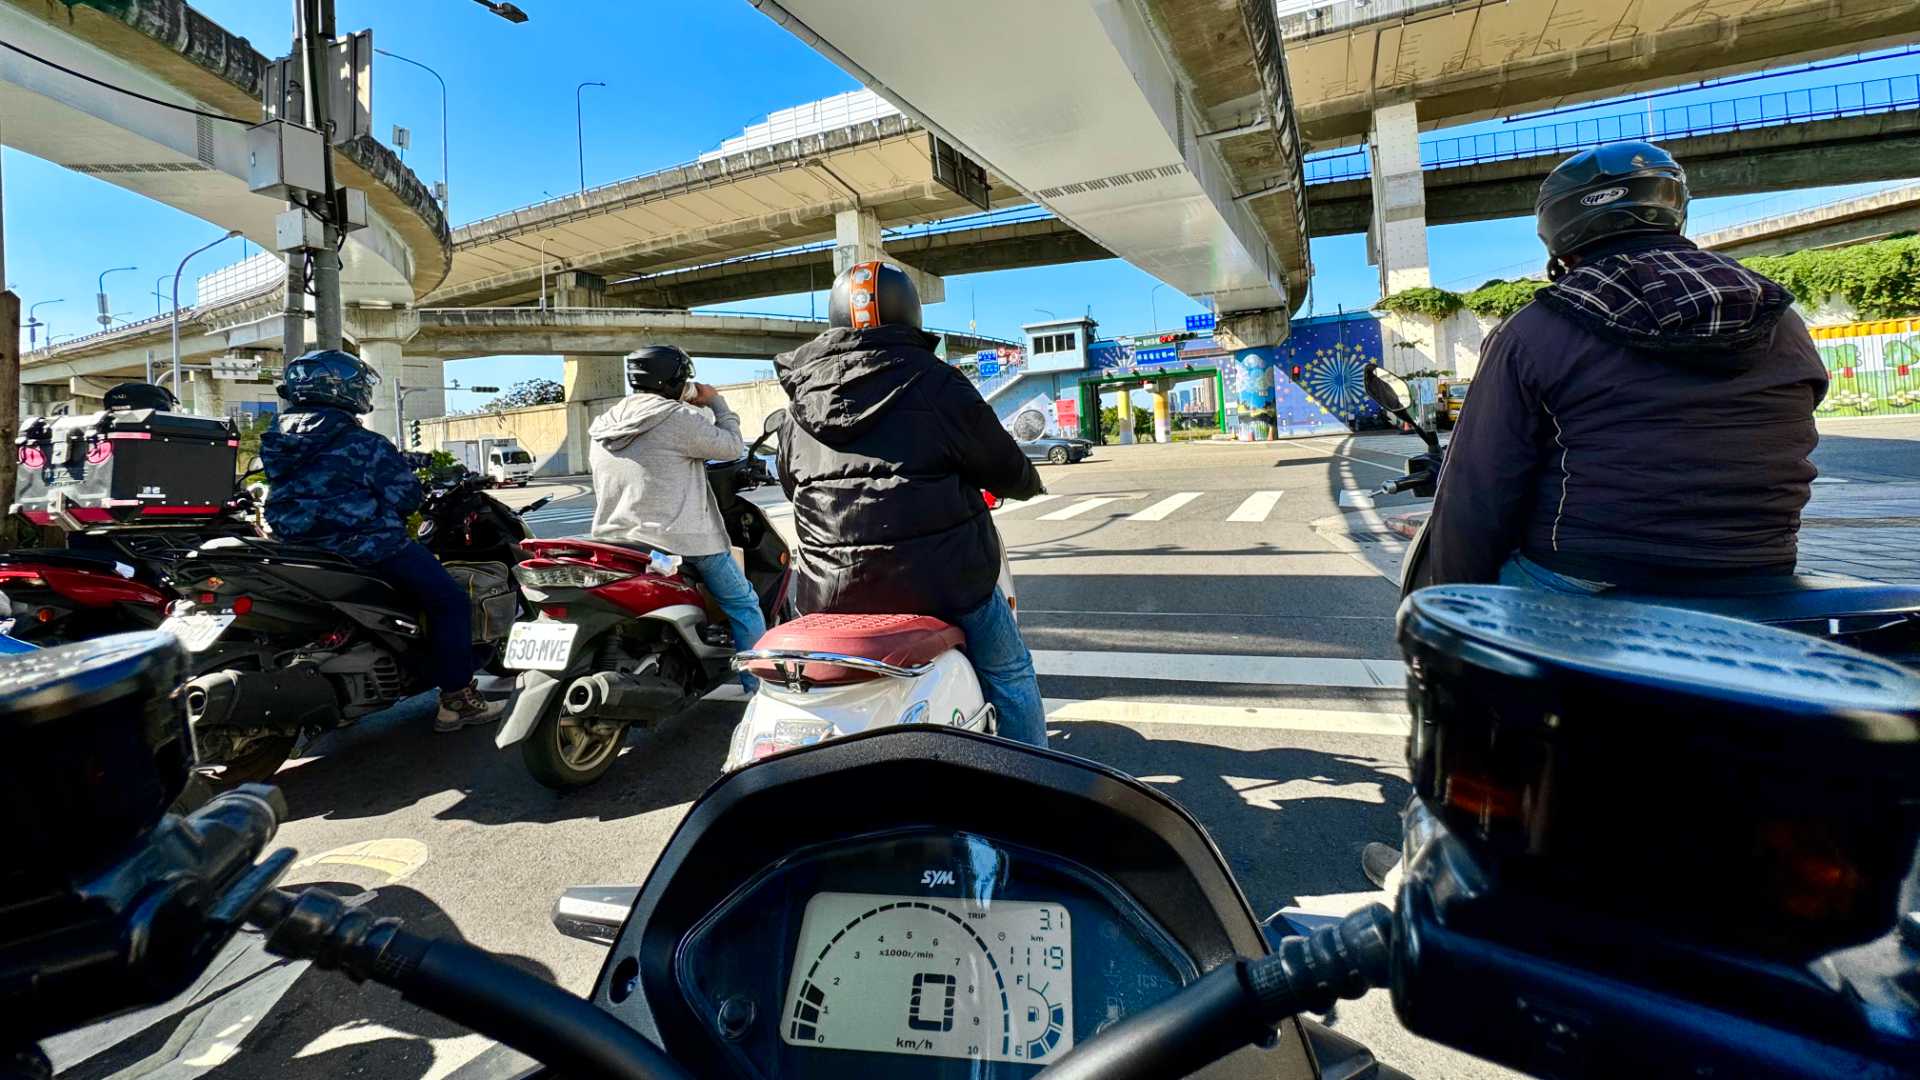 Photo taken from the point of view of a scooter rider waiting at traffic lights beneath a multi-level arrangement of overpasses in Taipei.